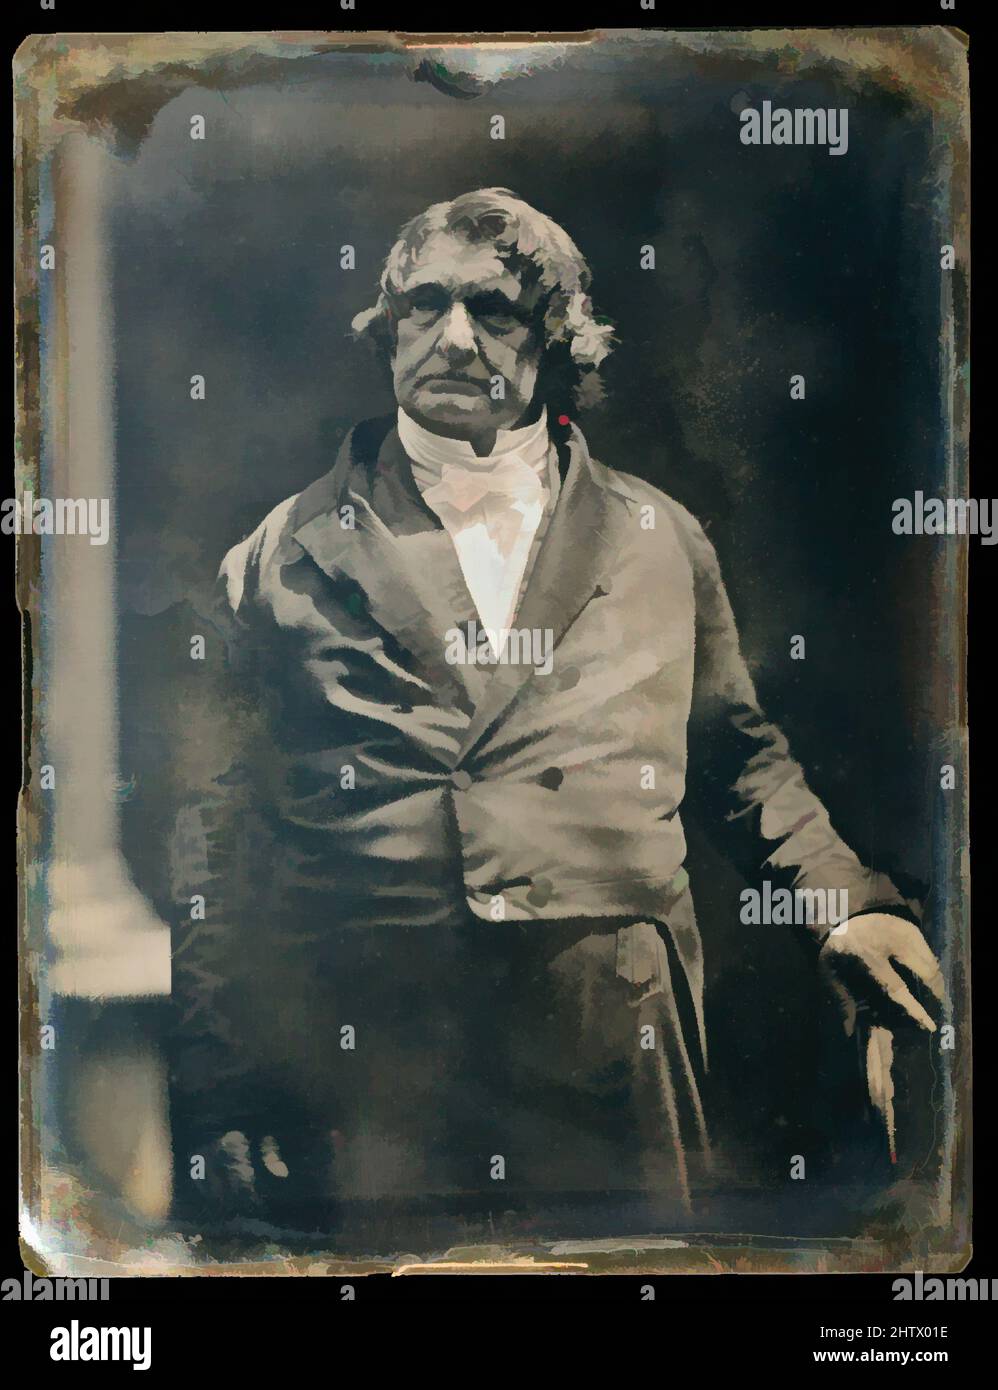 Art inspired by Lemuel Shaw, ca. 1850, Daguerreotype, 21.6 x 16.5 cm (8 1/2 x 6 1/2 in.), Photographs, Albert Sands Southworth (American, West Fairlee, Vermont 1811–1894 Charlestown, Massachusetts), Josiah Johnson Hawes (American, Wayland, Massachusetts 1808–1901 Crawford Notch, New, Classic works modernized by Artotop with a splash of modernity. Shapes, color and value, eye-catching visual impact on art. Emotions through freedom of artworks in a contemporary way. A timeless message pursuing a wildly creative new direction. Artists turning to the digital medium and creating the Artotop NFT Stock Photo